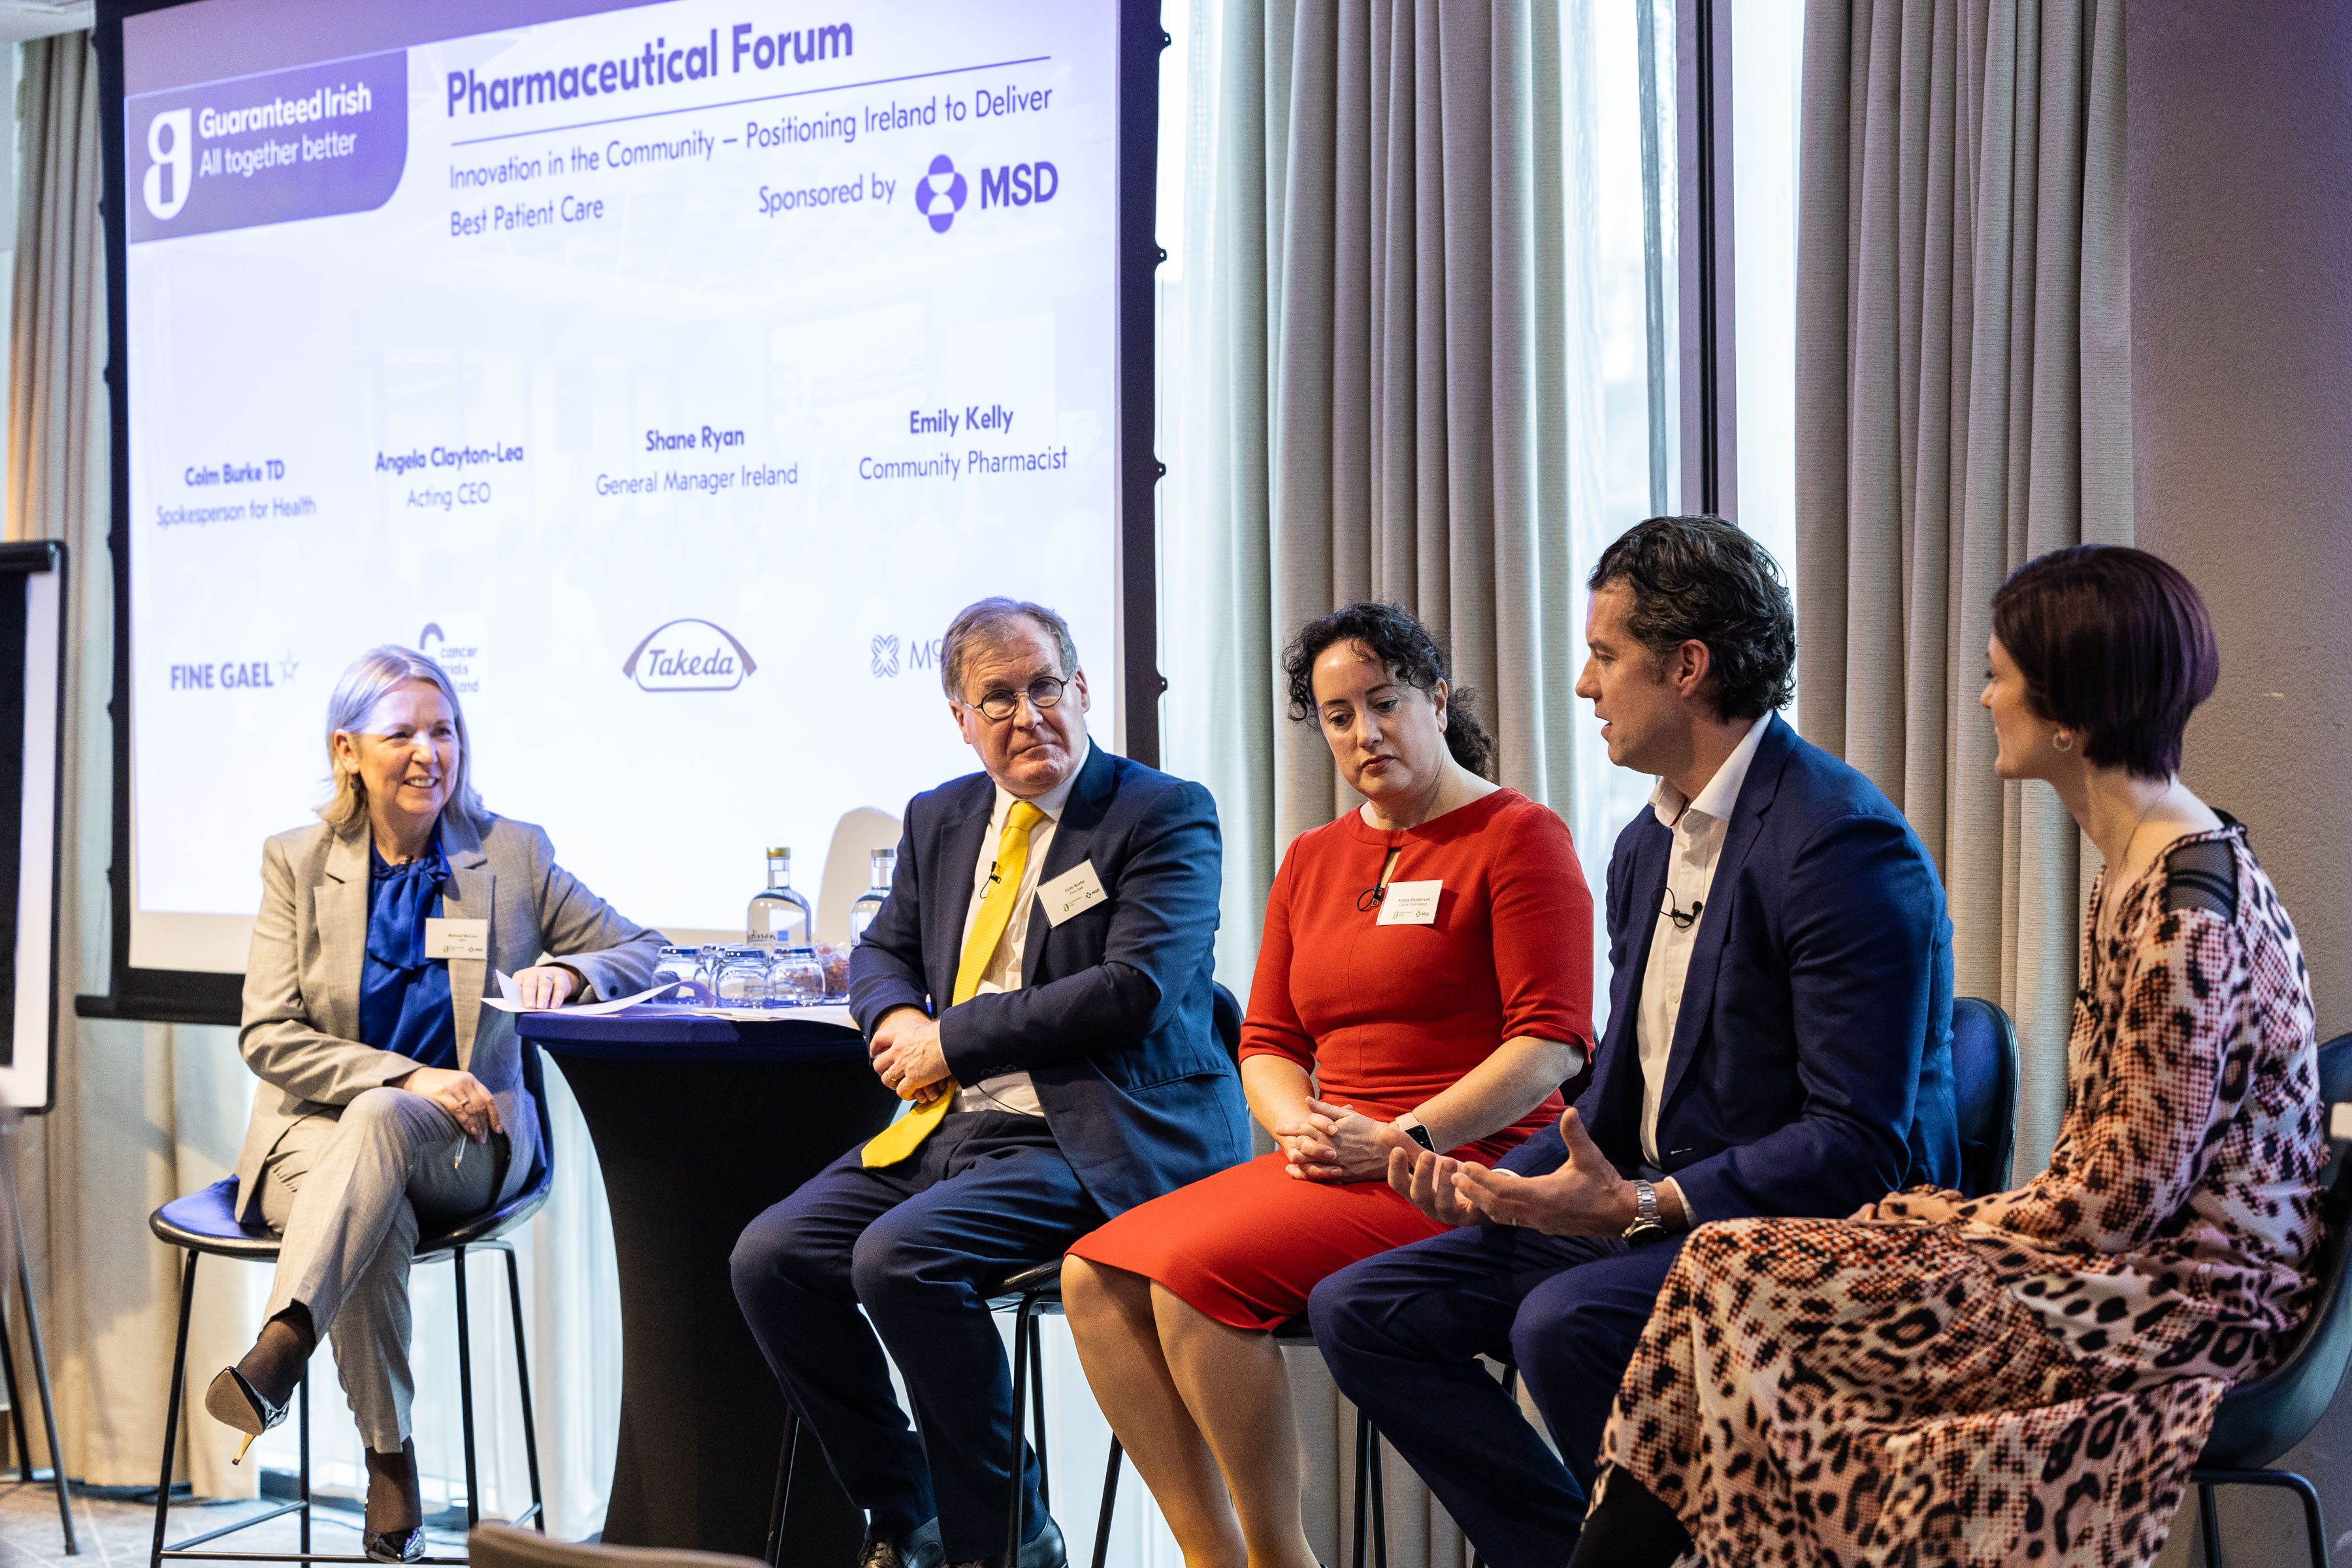 Panel of Guaranteed Irish pharmaceutical experts discuss the need for collaboration and partnership with Government and key stakeholders to improve digital access to data within the Community.